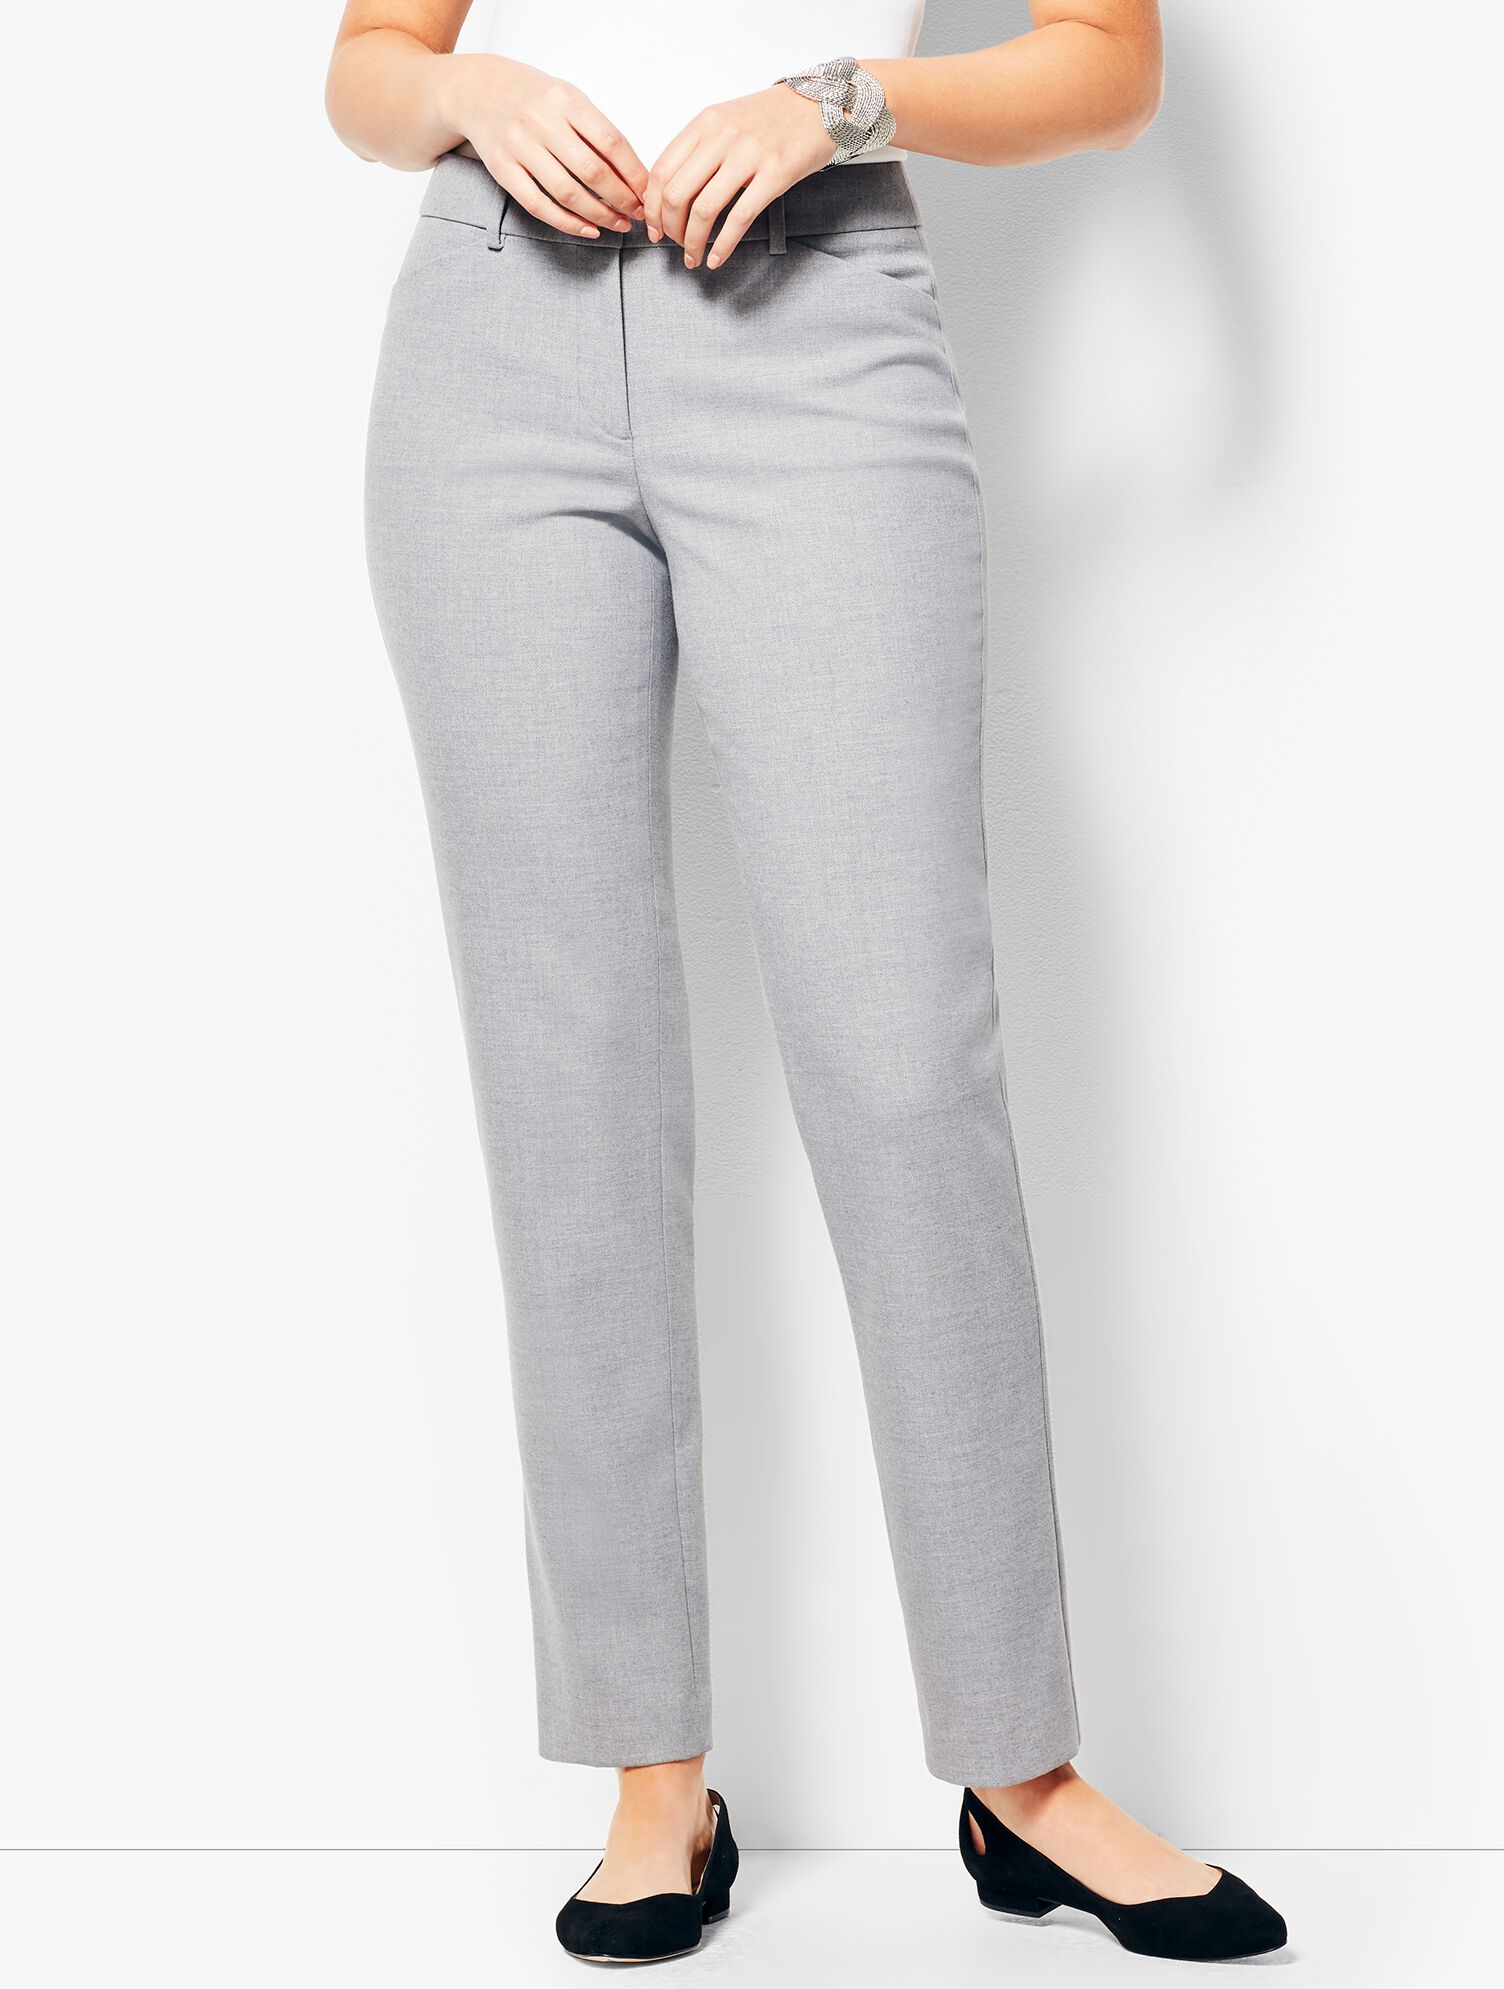 Talbots Hampshire Ankle Pant - Grey/Curvy Fit